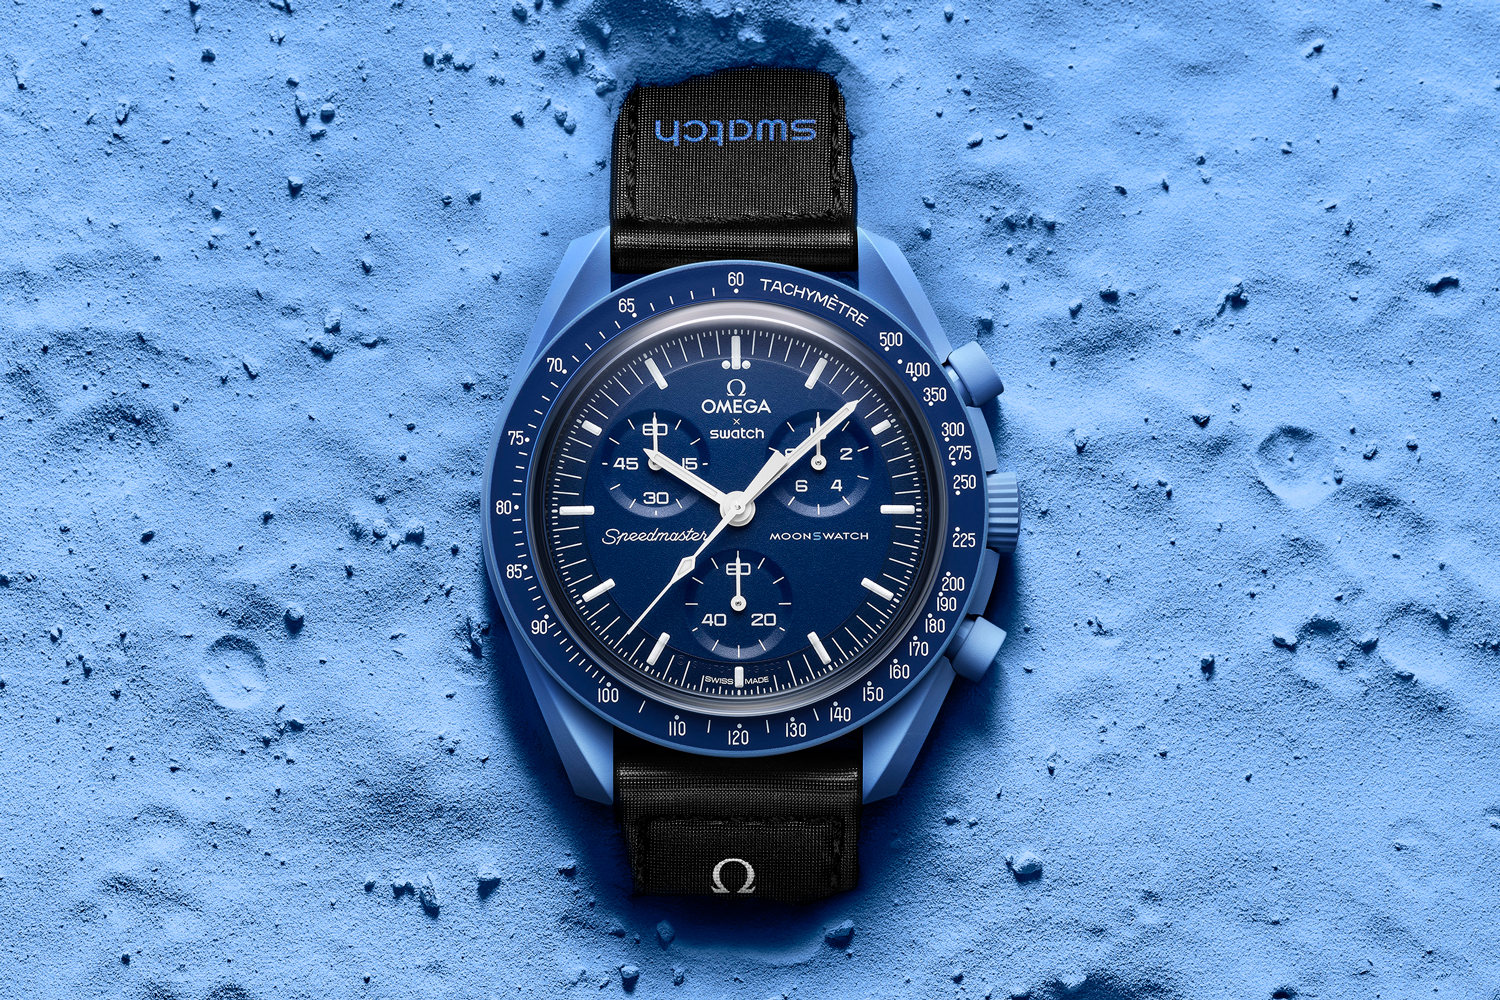 Omega x Swatch — The MoonSwatch in Bioceramic - Revolution